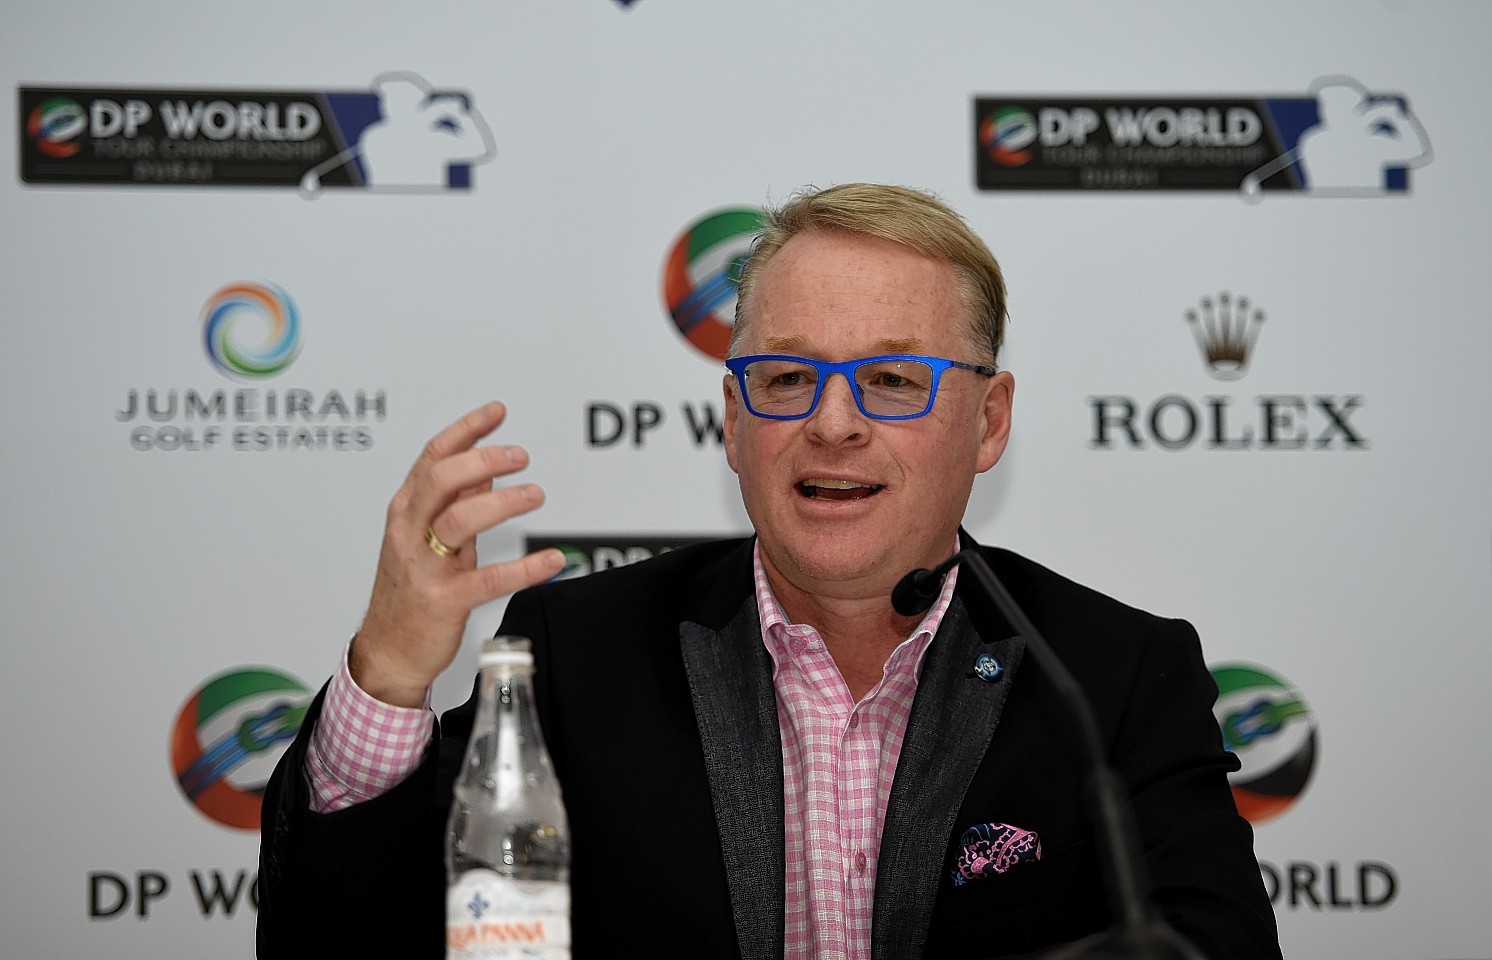 Keith Pelley, Chief Executive of The European Tour, confirmed the schedule will not change